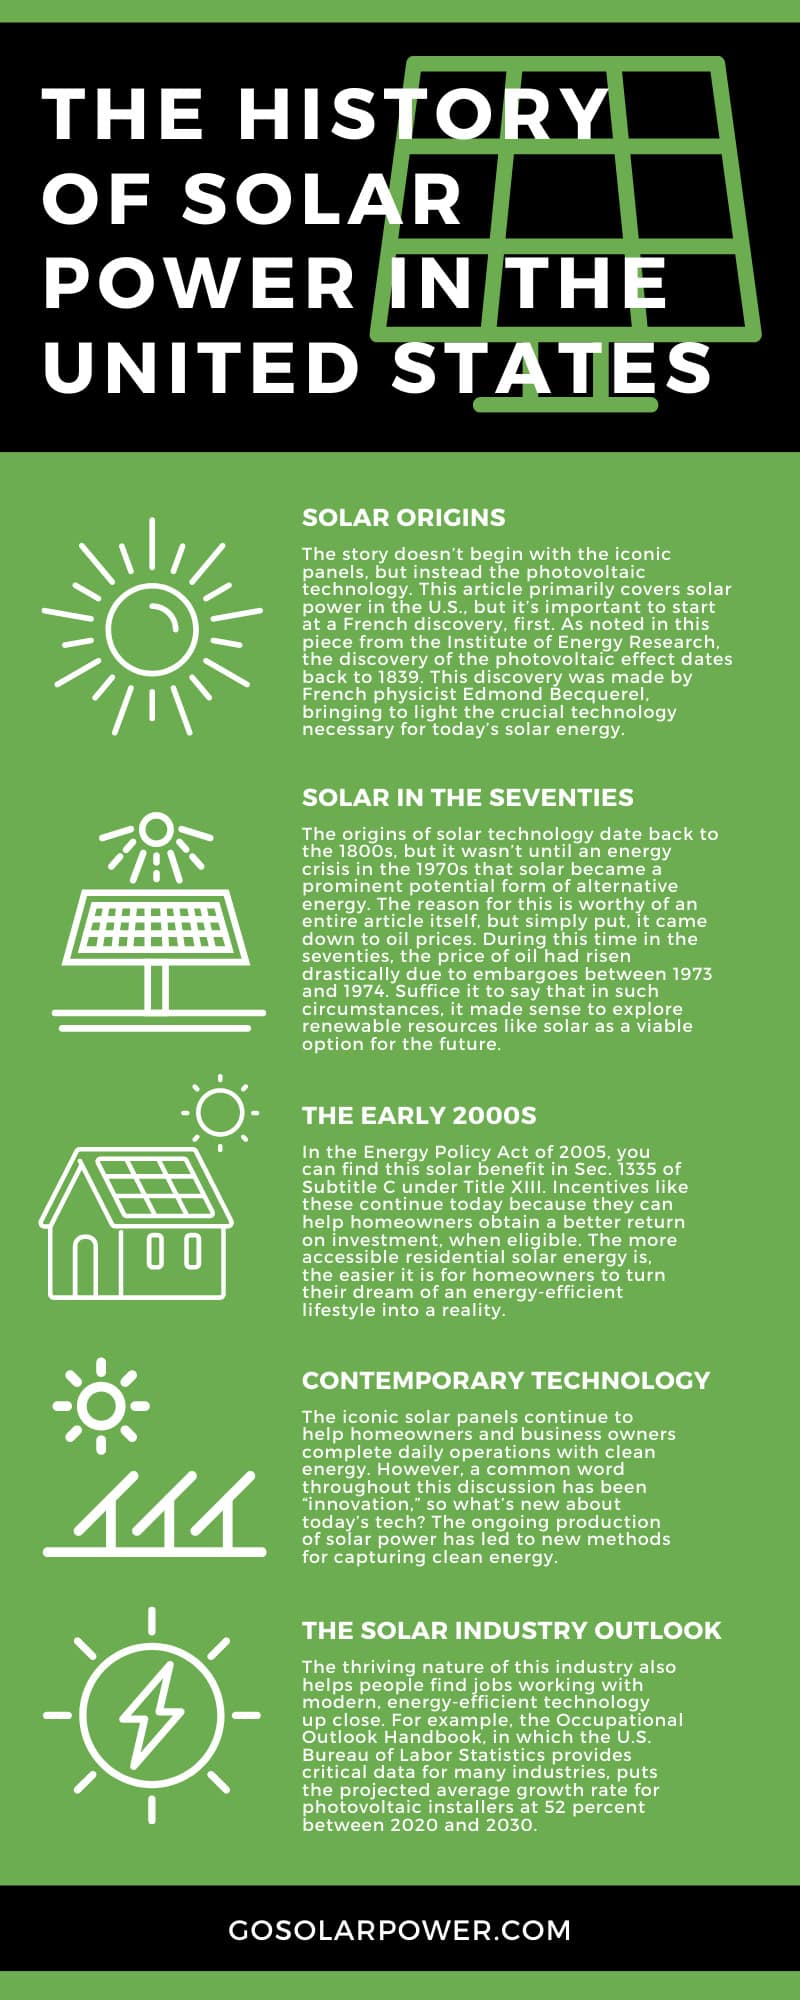 The History of Solar Power in the United States